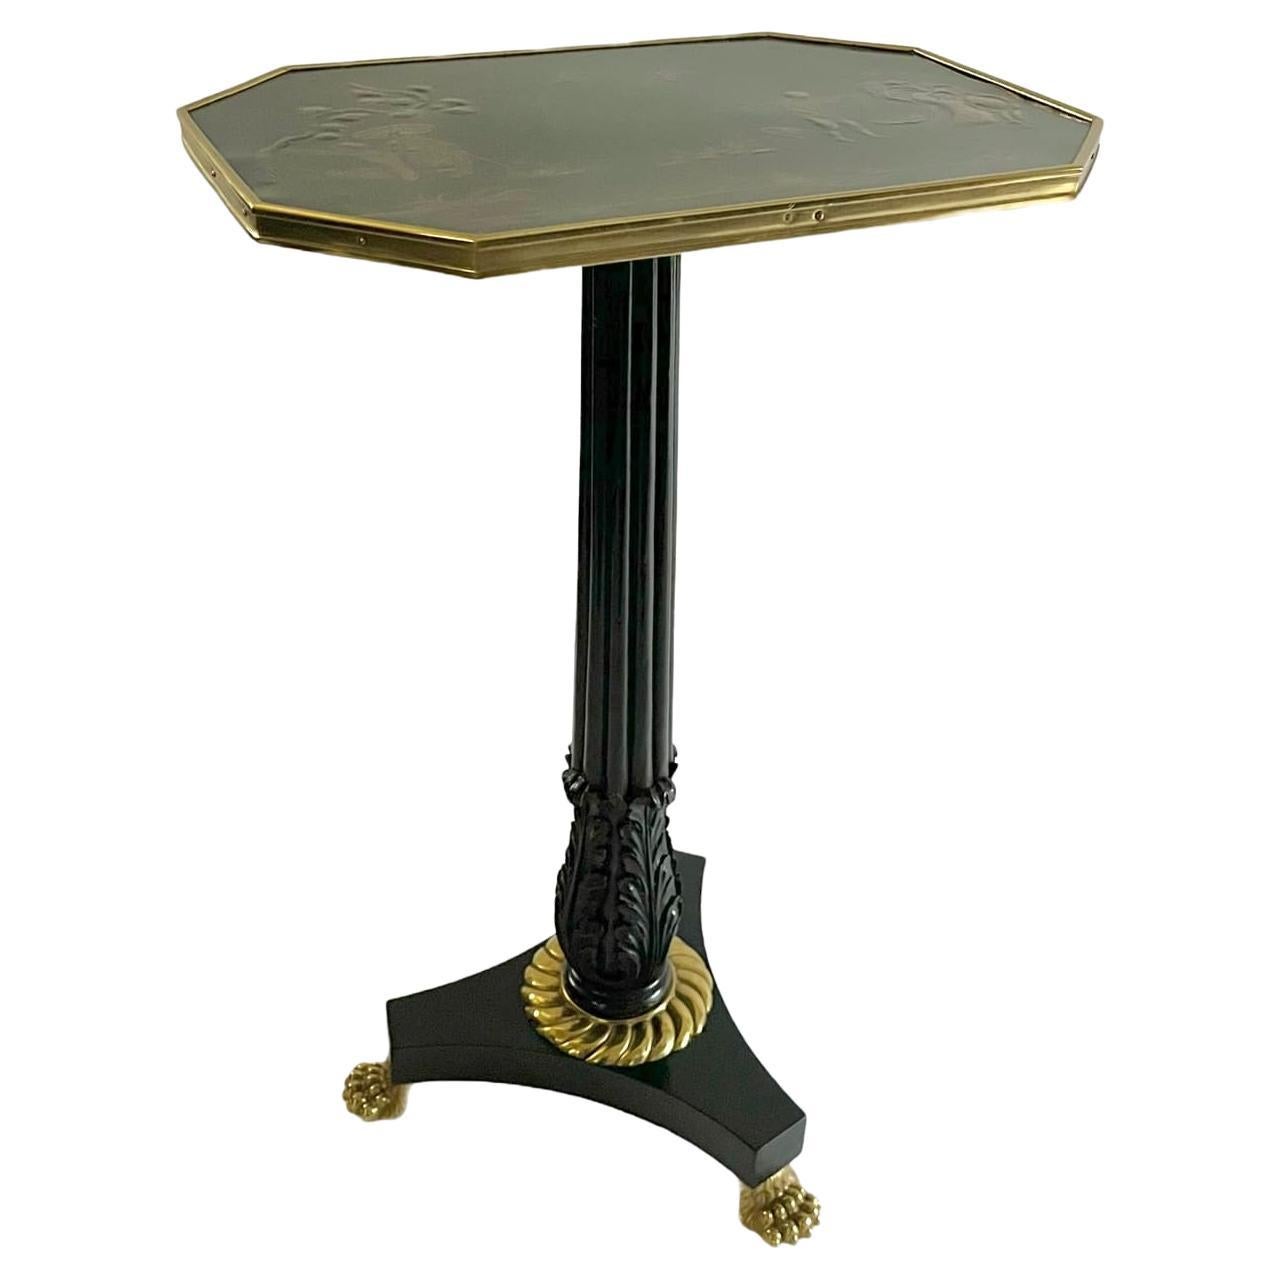 English Regency Chinoiserie Lacquer Top Ebonized Brass Mounted Stand, circa 1820 For Sale